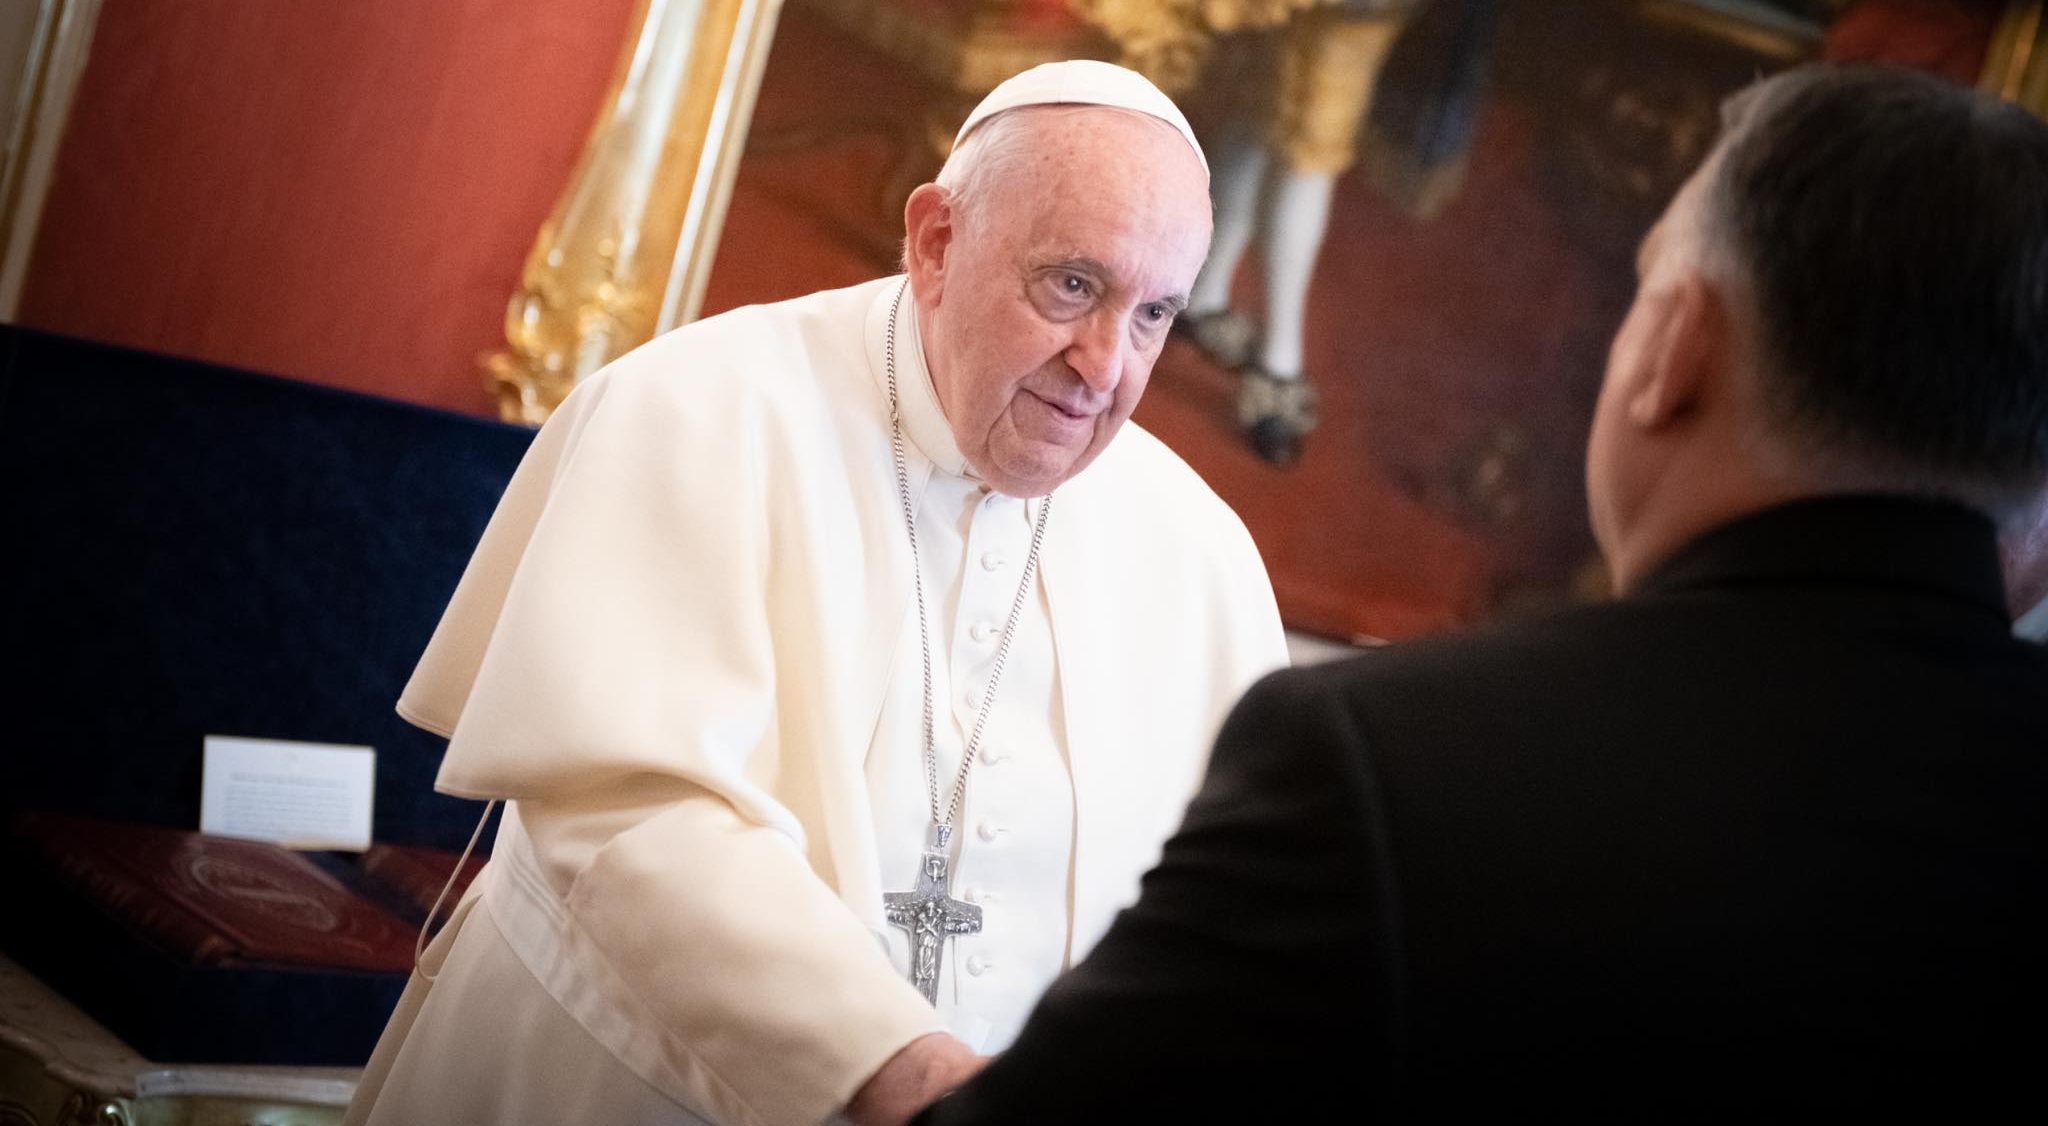 Pope Francis Writes about His Visit to Hungary in His Latest Biography